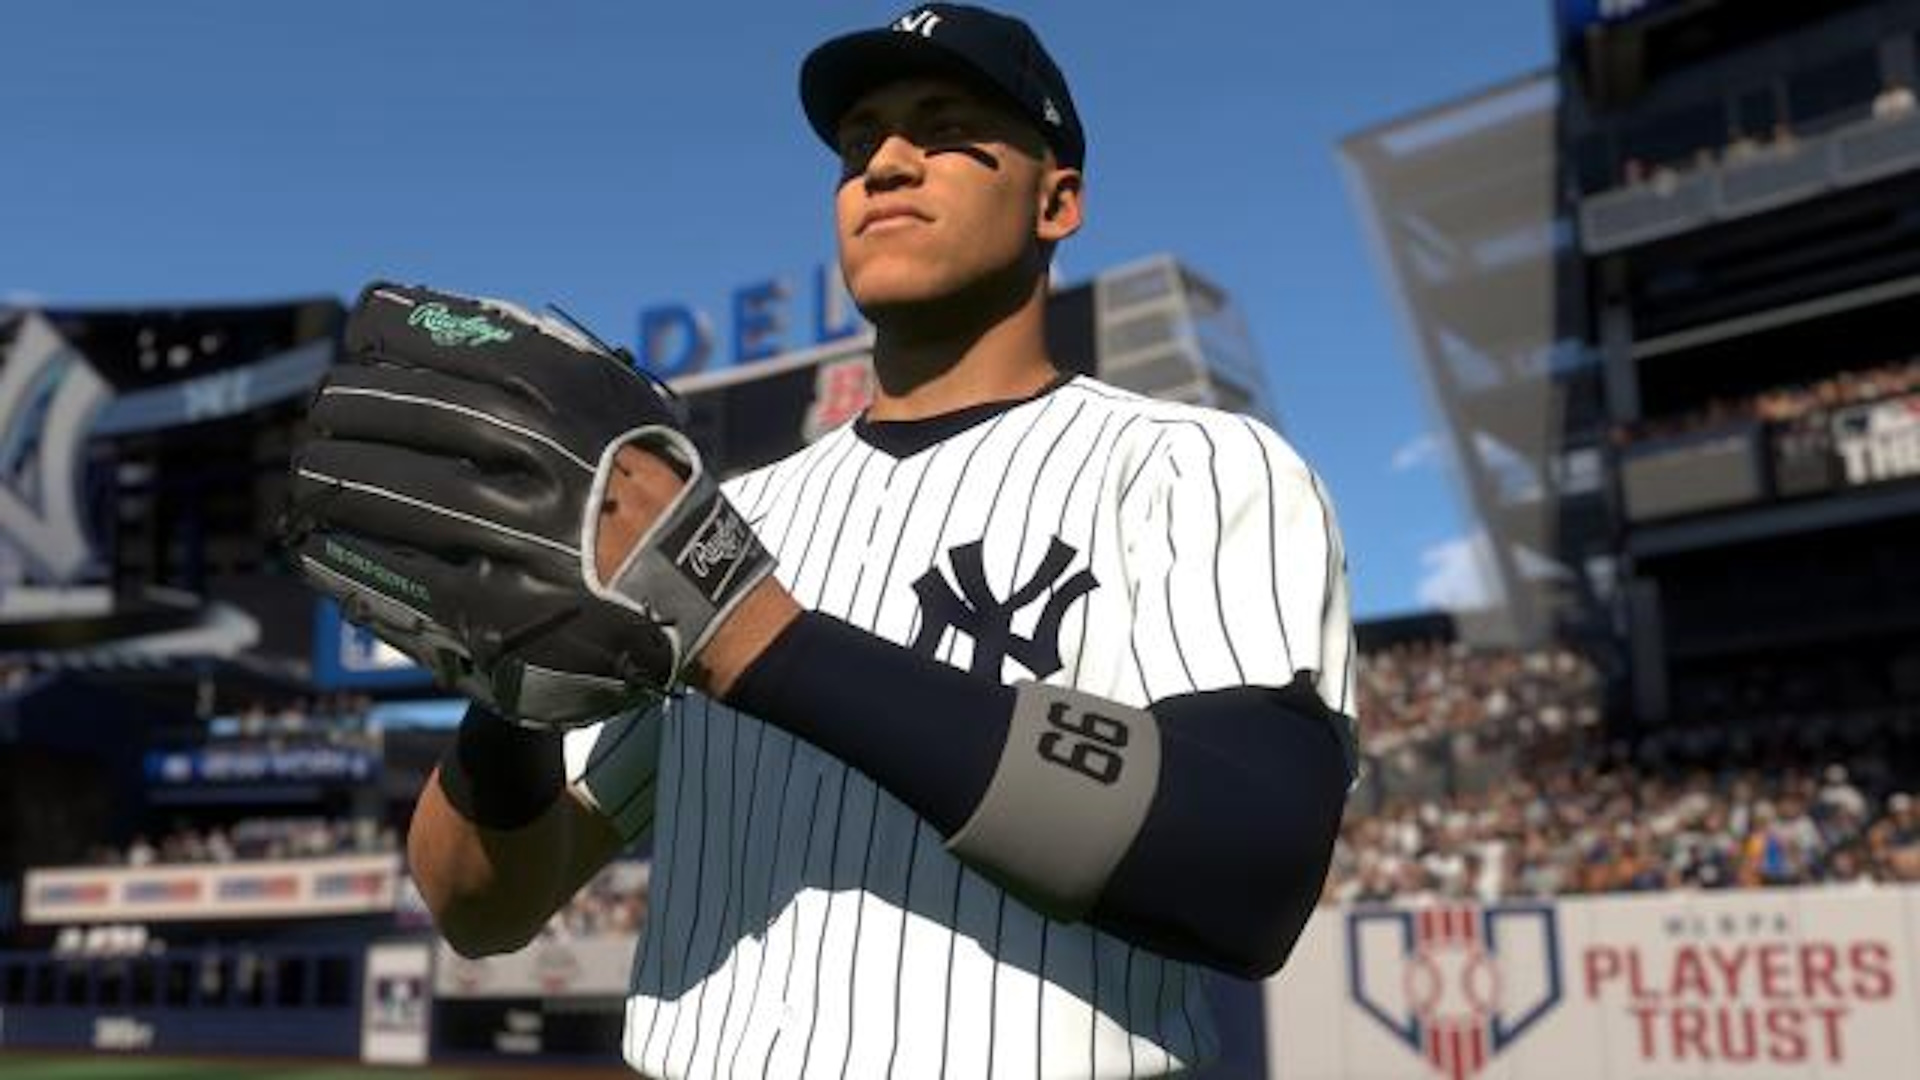 MLB The Show 24's Aaron Judge holding a ball in a catching mitt